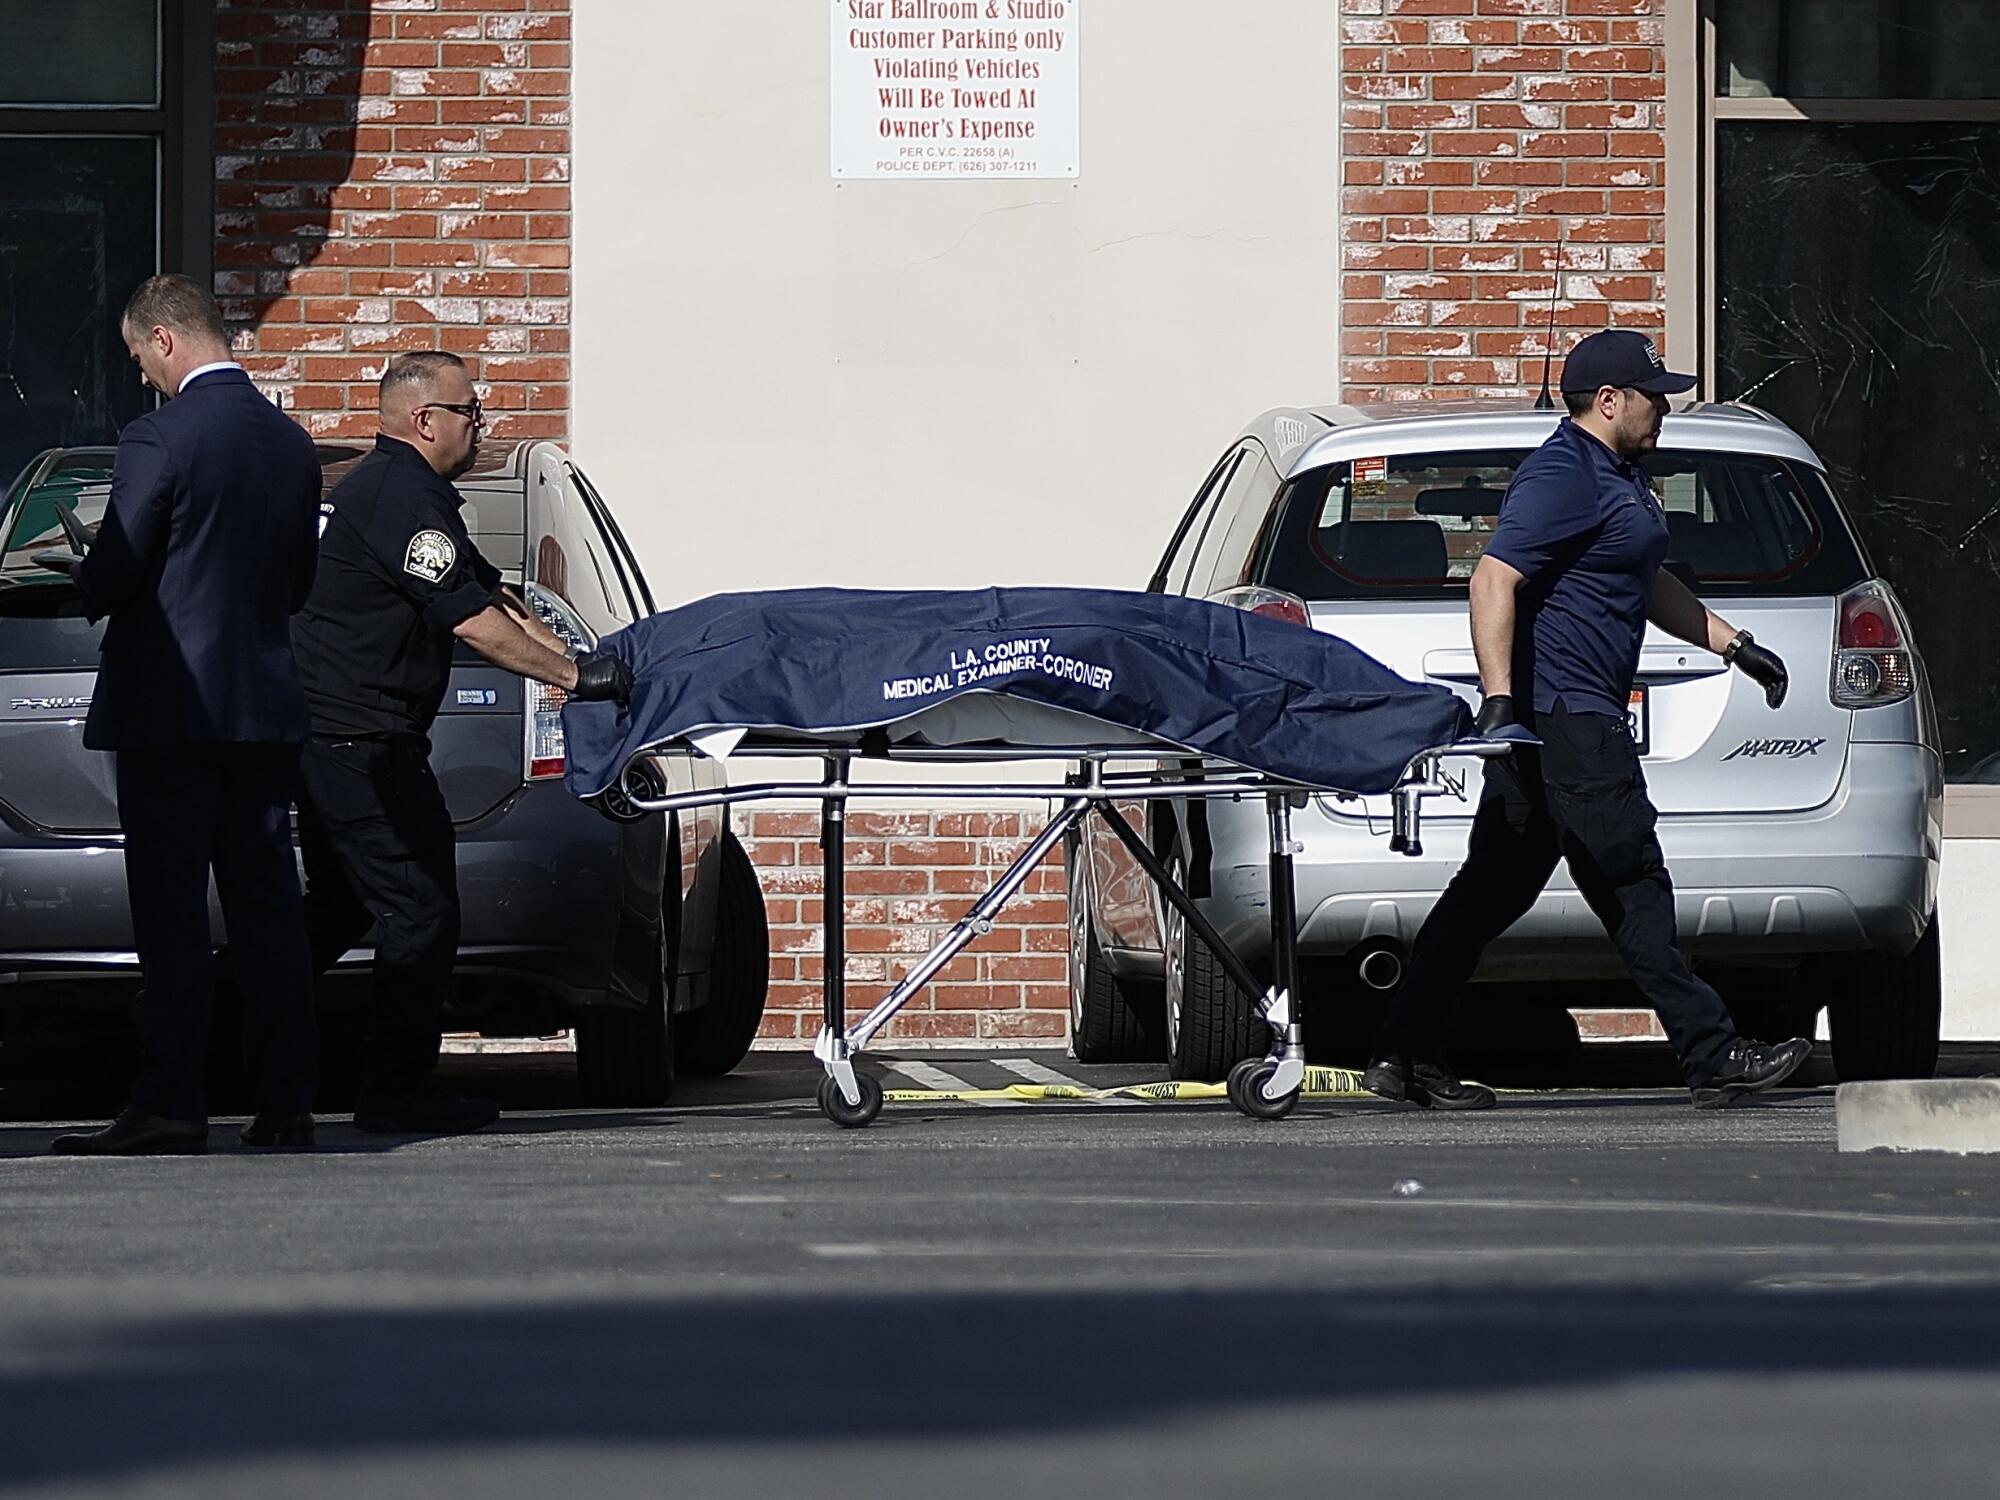 Los Angeles County coroners remove the body of one of the victims from the rear parking lot.